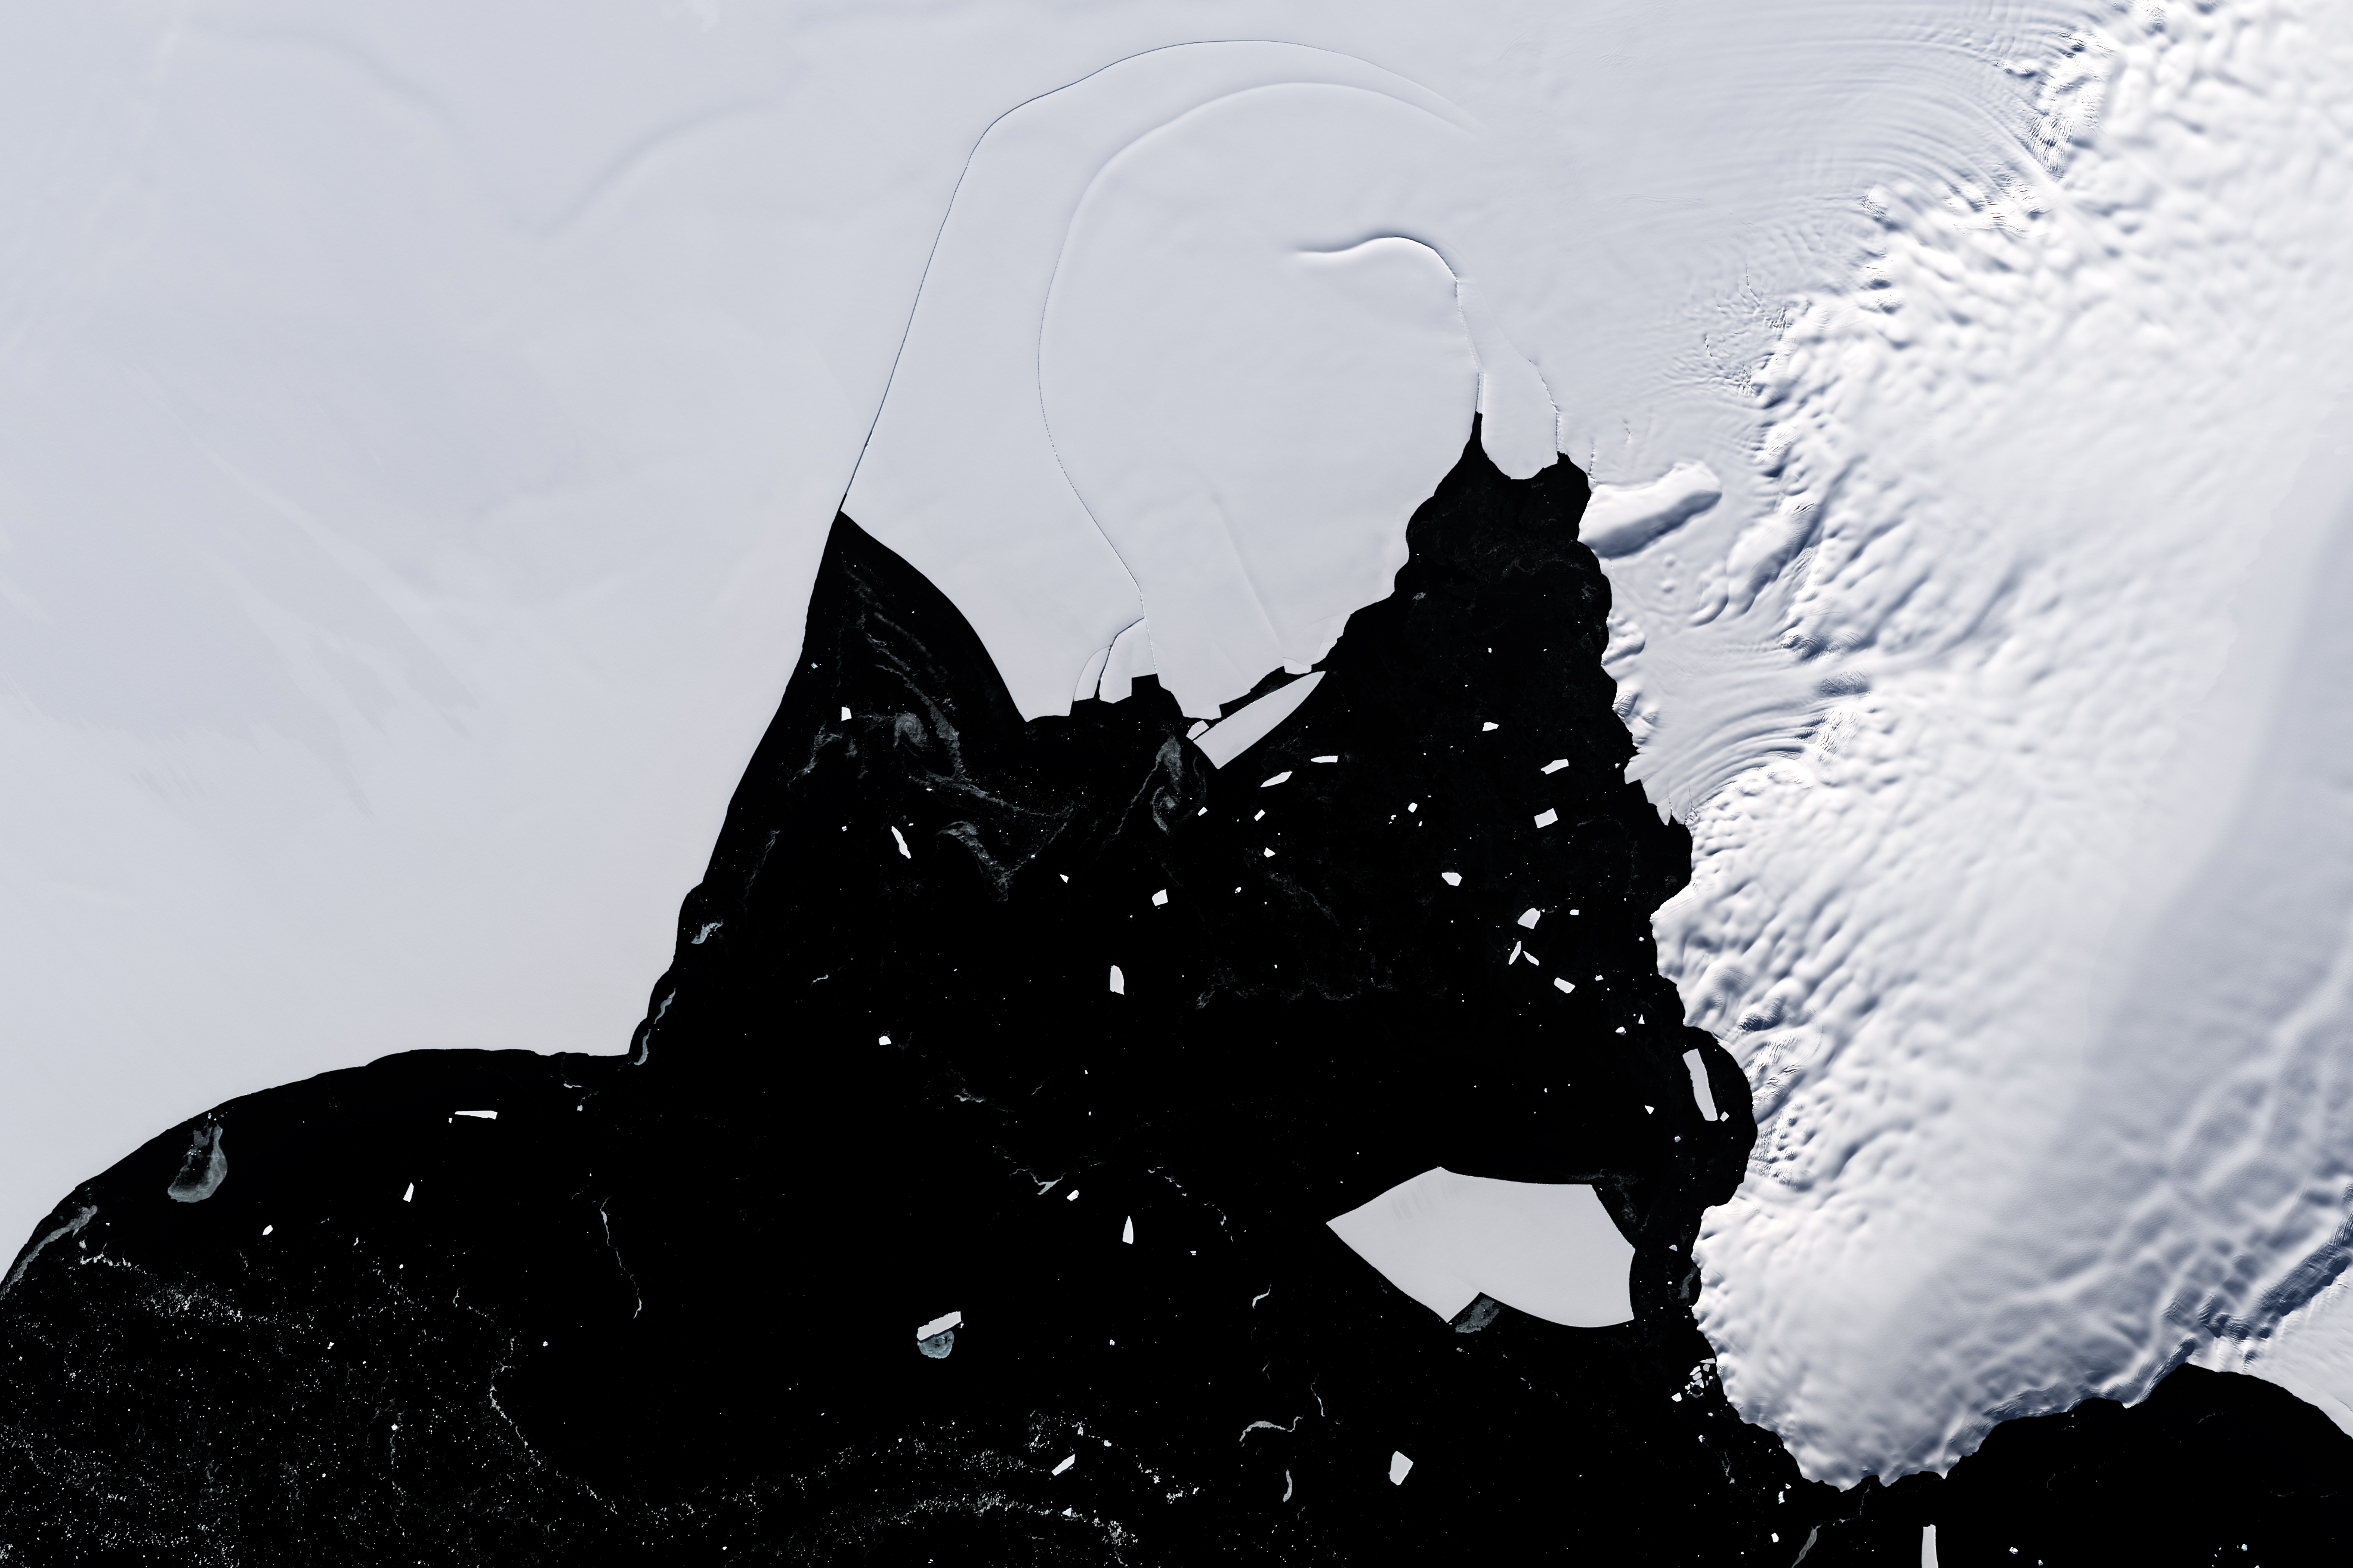 There image is primarily white sea ice with dark ocean at the bottom of the image along with sporadic icebergs. The- feature is the small hole in the Wilkins Ice Shelf that exposes the underlying ocean. This oddity has persisted for decades and is thought to be a rare phenomenon.